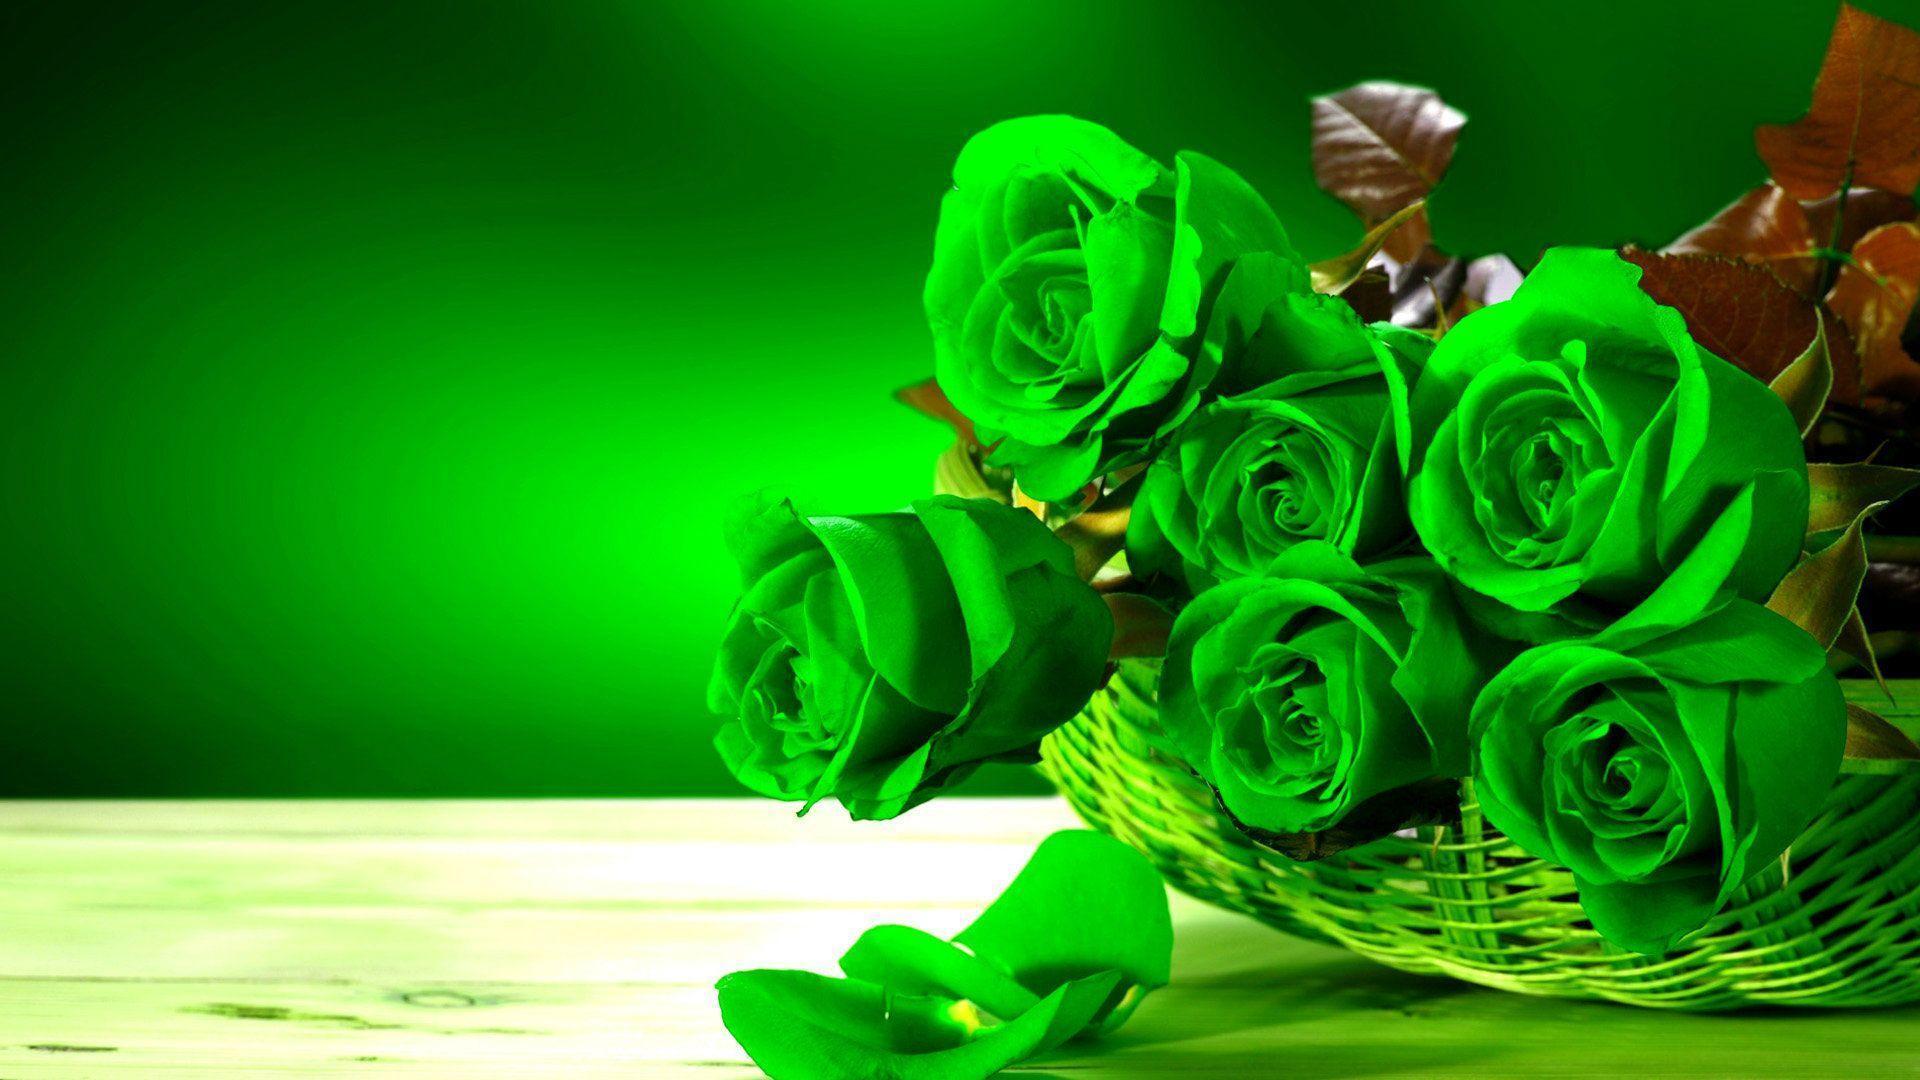 HD Picture Of Roses 800×600 Rose Image HD Wallpaper 53